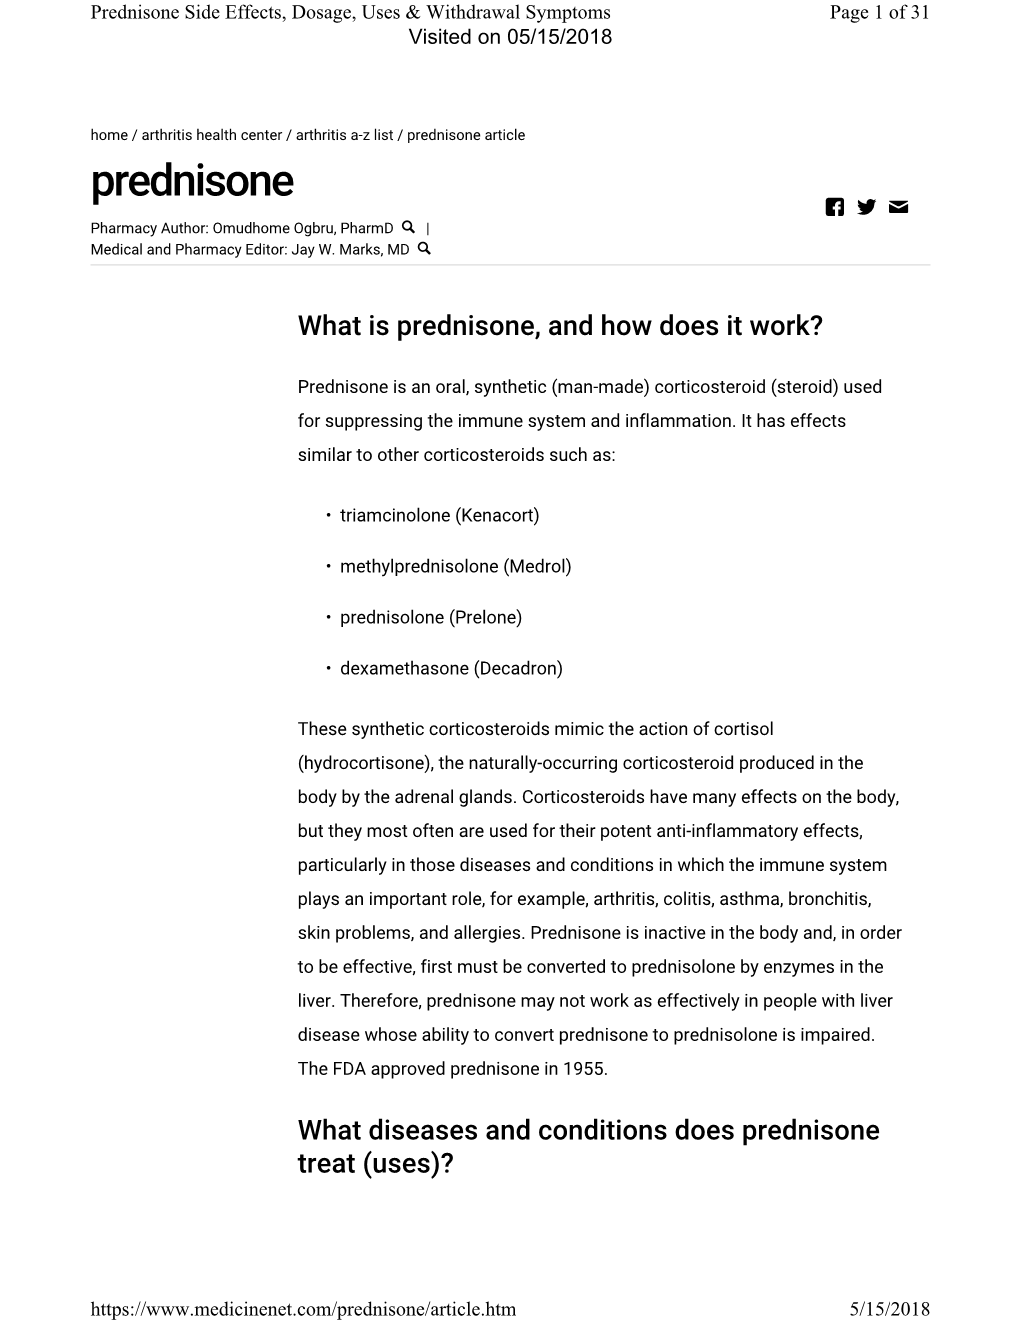 Prednisone Side Effects, Dosage, Uses & Withdrawal Symptoms Page 1 of 31 Visited on 05/15/2018